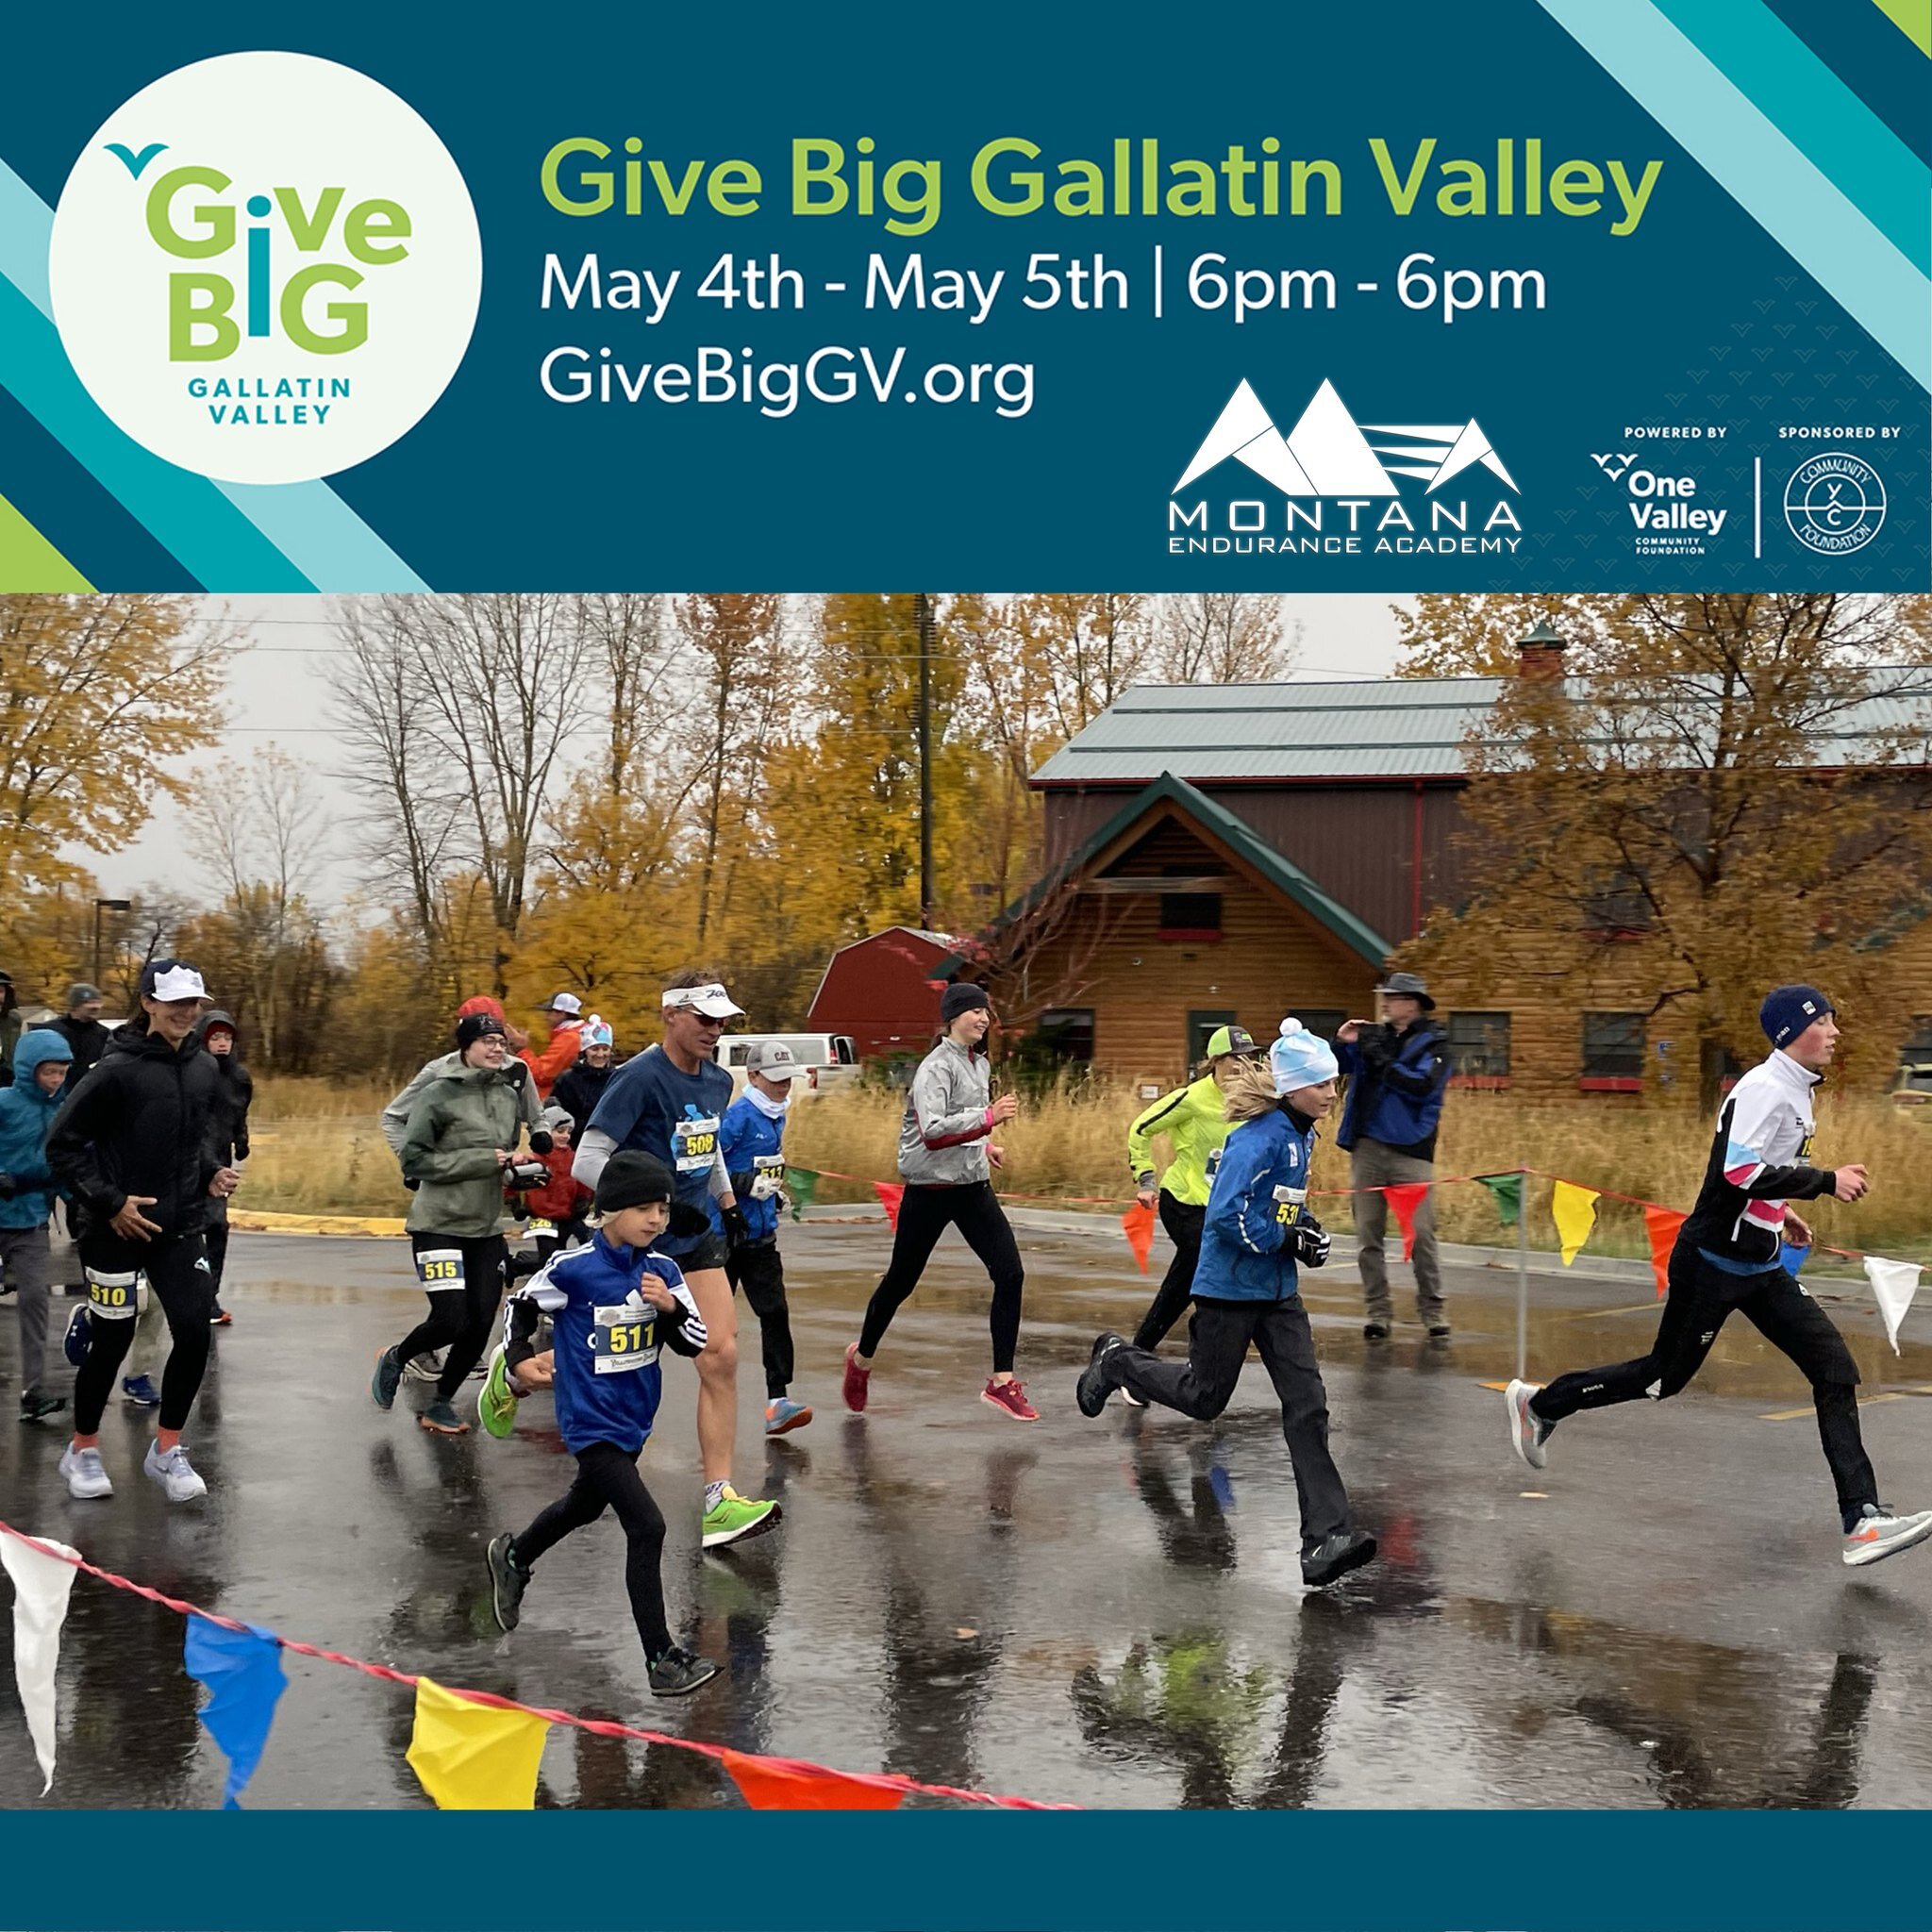 We are determined to support and help everybody in reaching their potential. 

Montana Endurance Academy&rsquo;s Story Mill Stride, a fun community road race held in October, starts at Story Mill Community Park in Bozeman and goes up to the M Trailhe